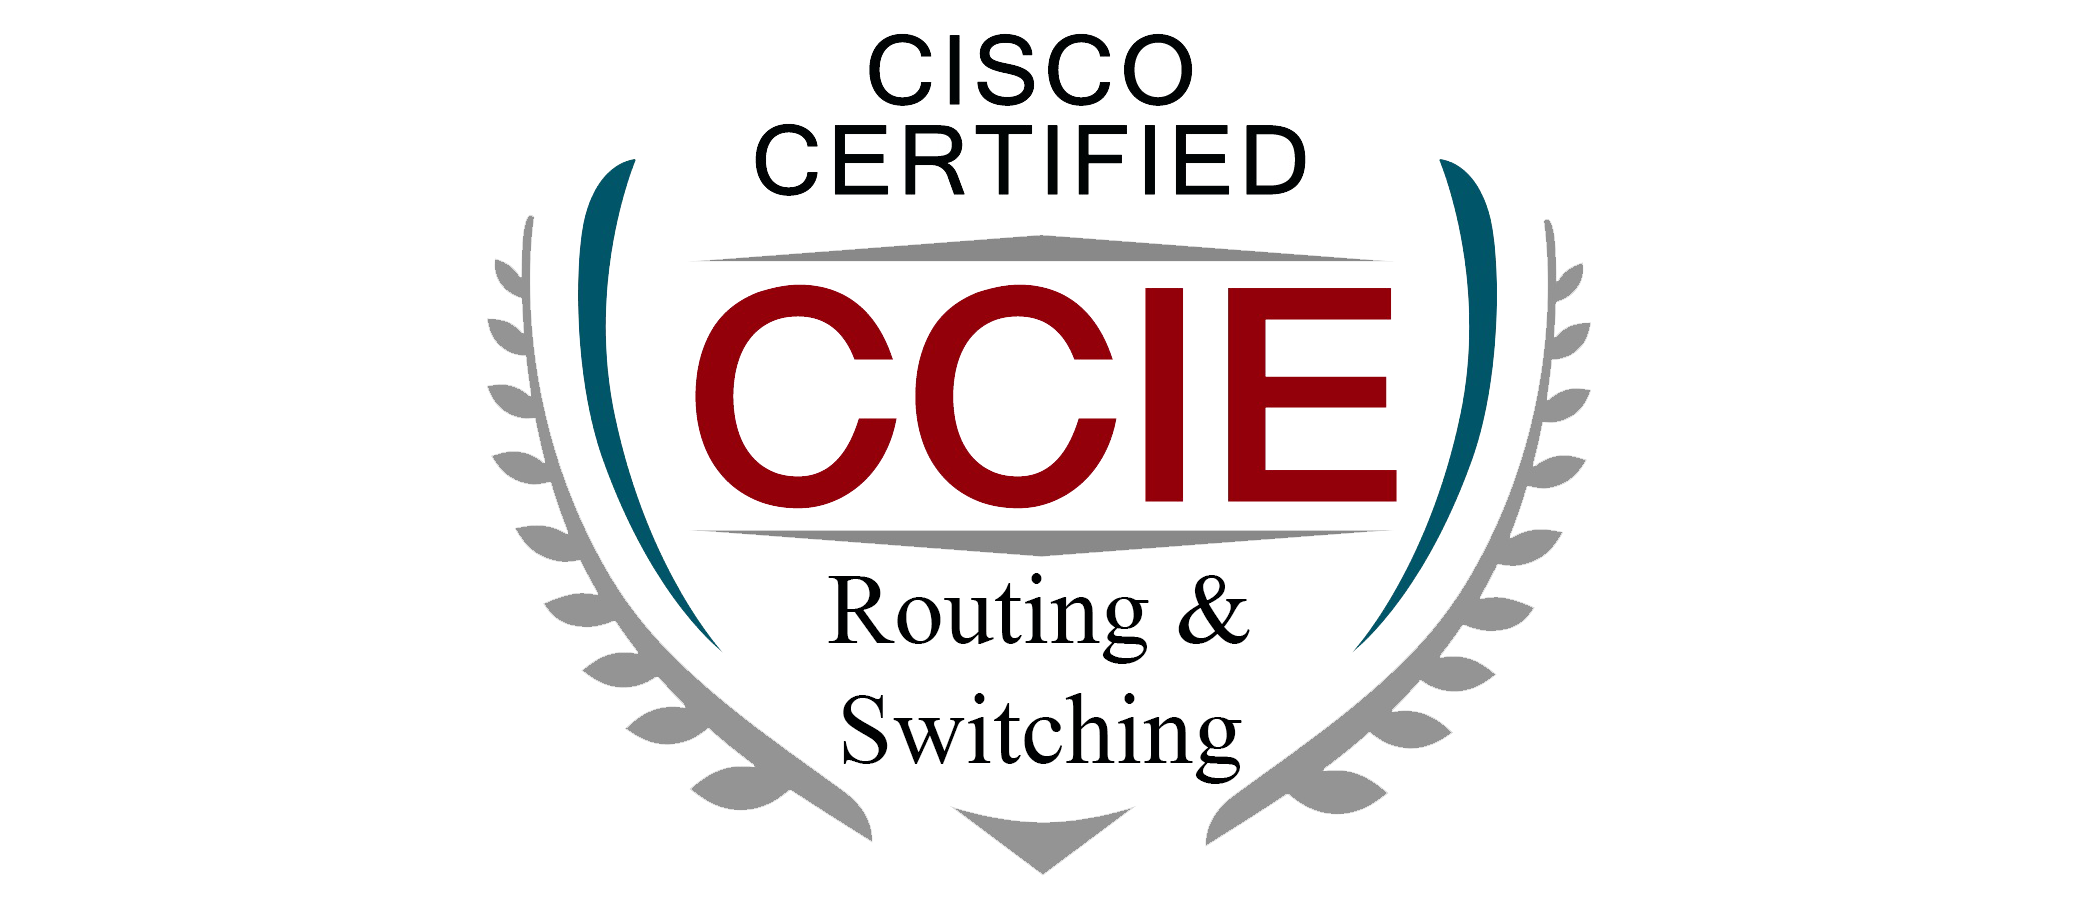 Cisco Certified Internetwork Expert Routing and Switching (CCIE Routing and Switching) certifies the skills required of expert-level network engineers to plan, operate and troubleshoot complex, converged network infrastructure. More info...